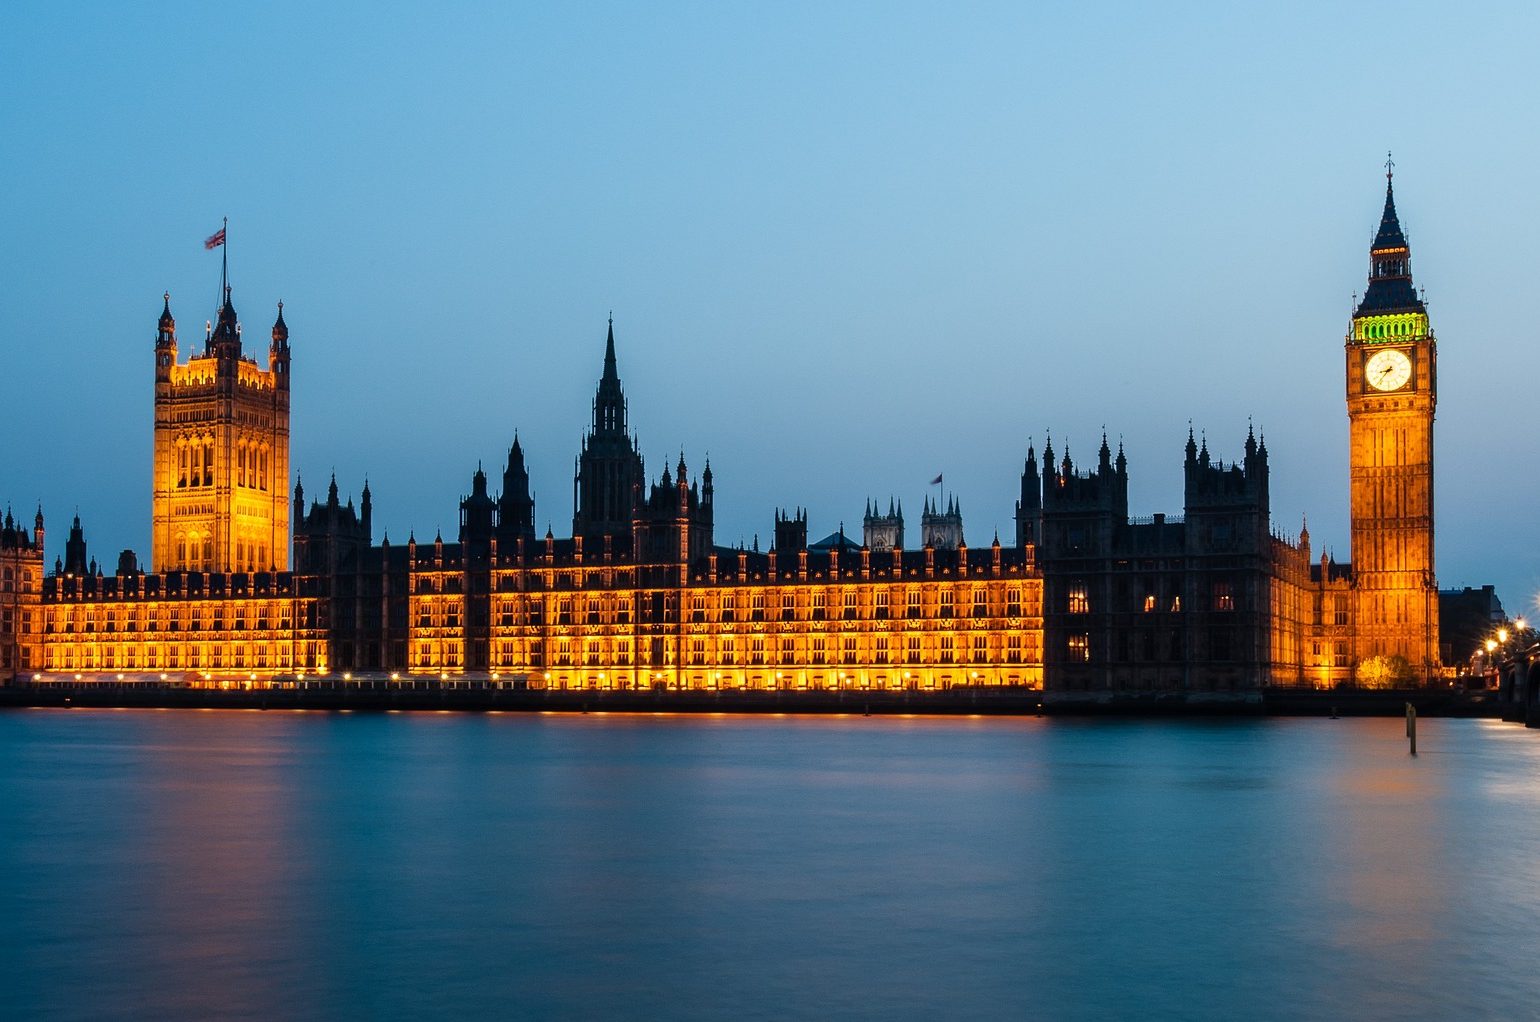 houses-of-parliament-at-night-mobile